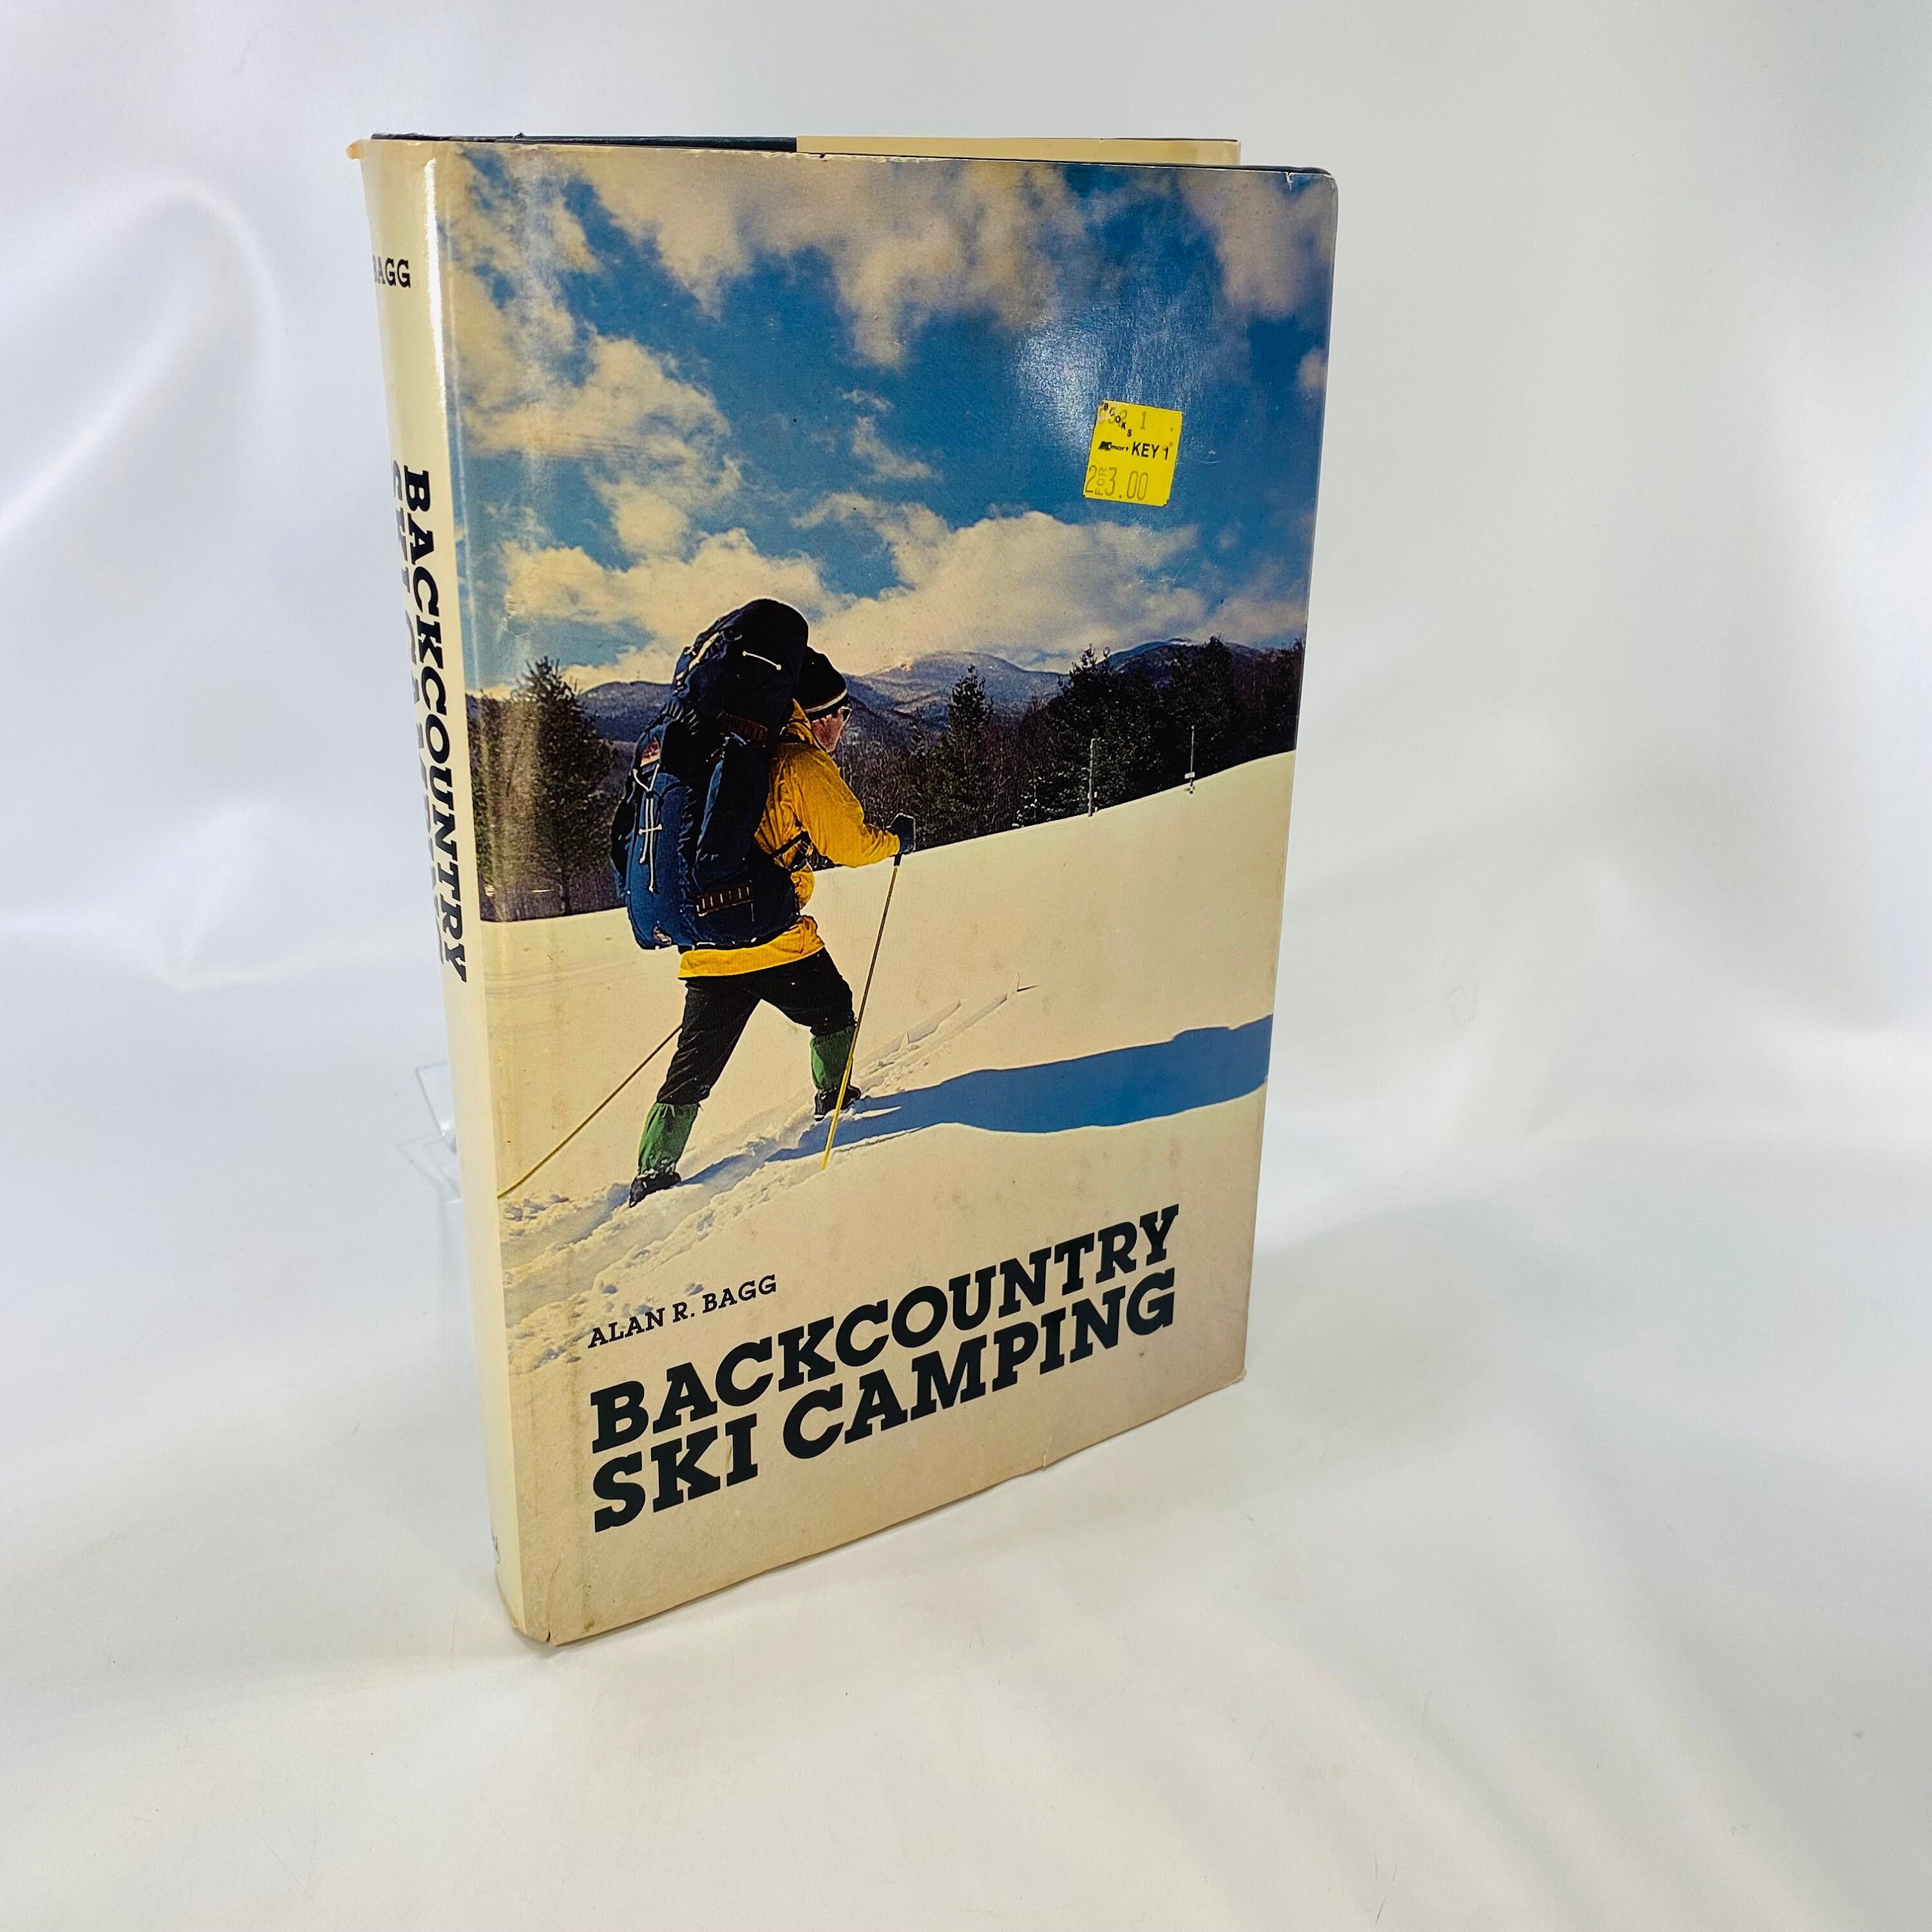 Backcountry Ski Camping by Alan R. Bagg 1978 Contemporary Books